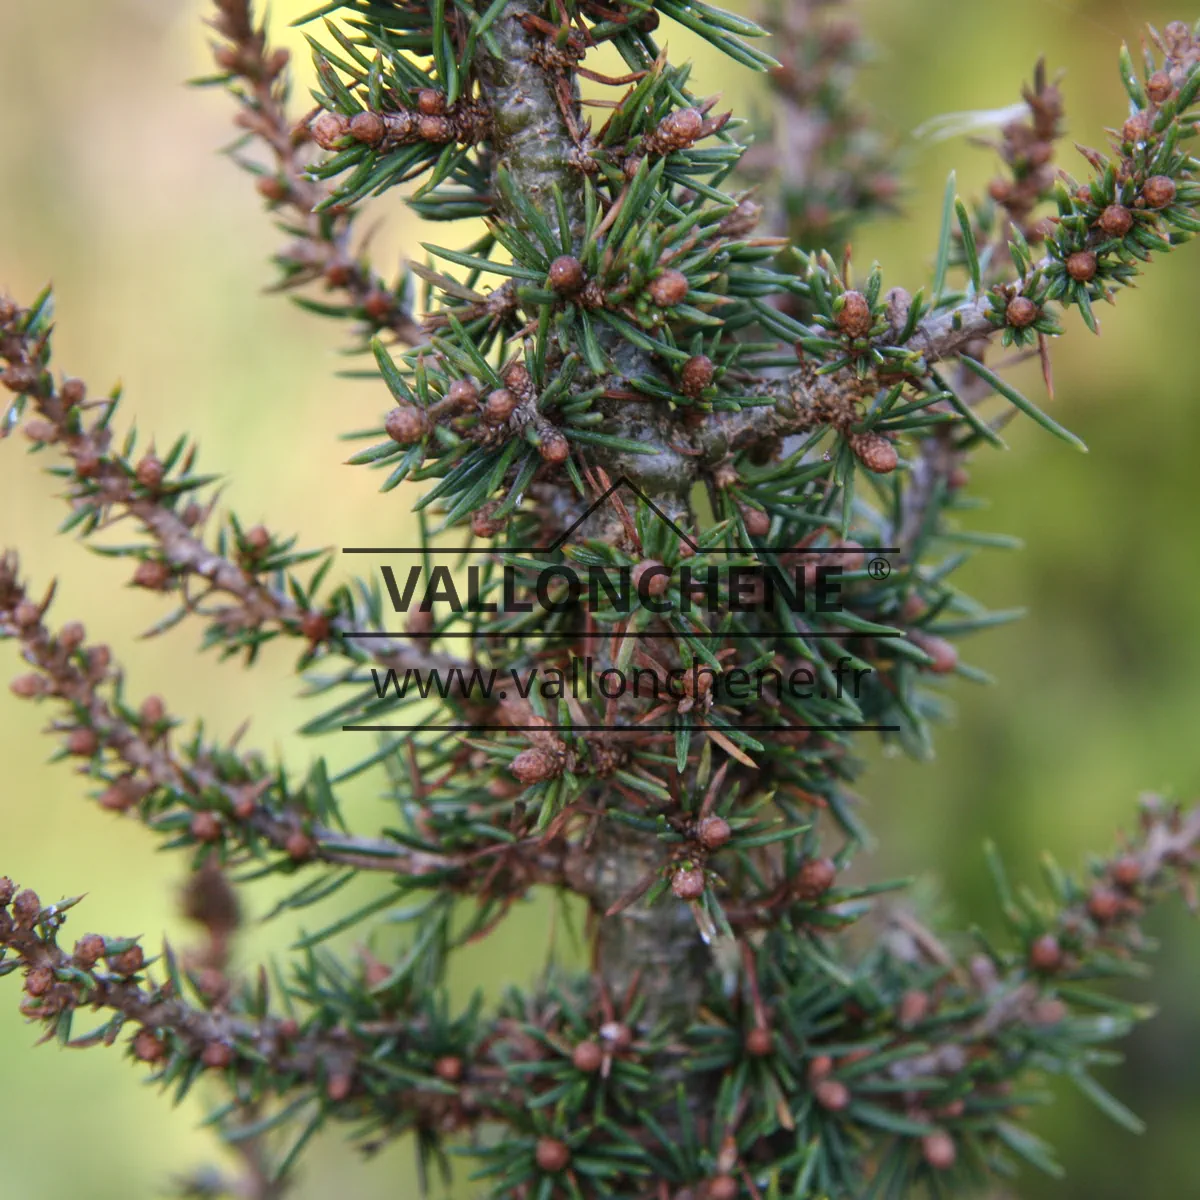 Close-up of the needles and bark of CEDRUS libanii ssp. brevifolia 'Kenwith'